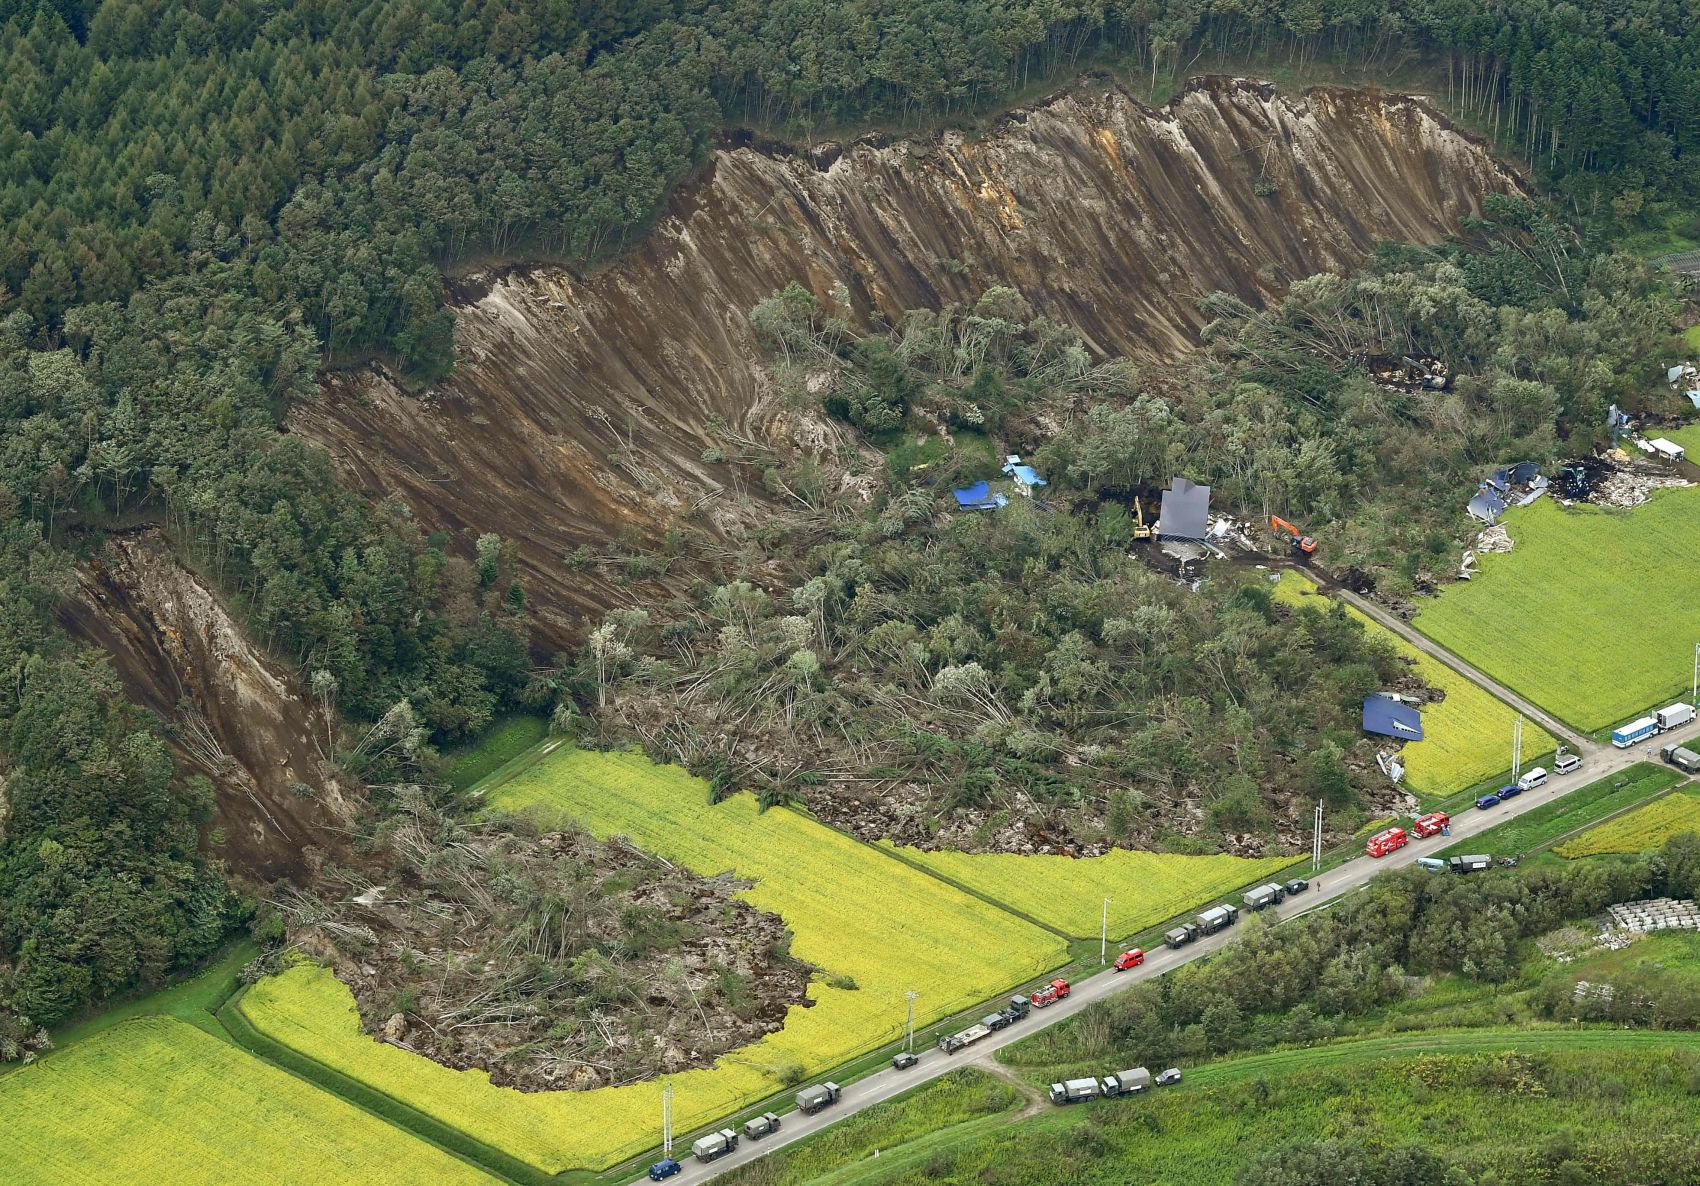 Disasters’ Aftermath: Japan’s Infrastructure Recovers, but Tourism Still Suffers